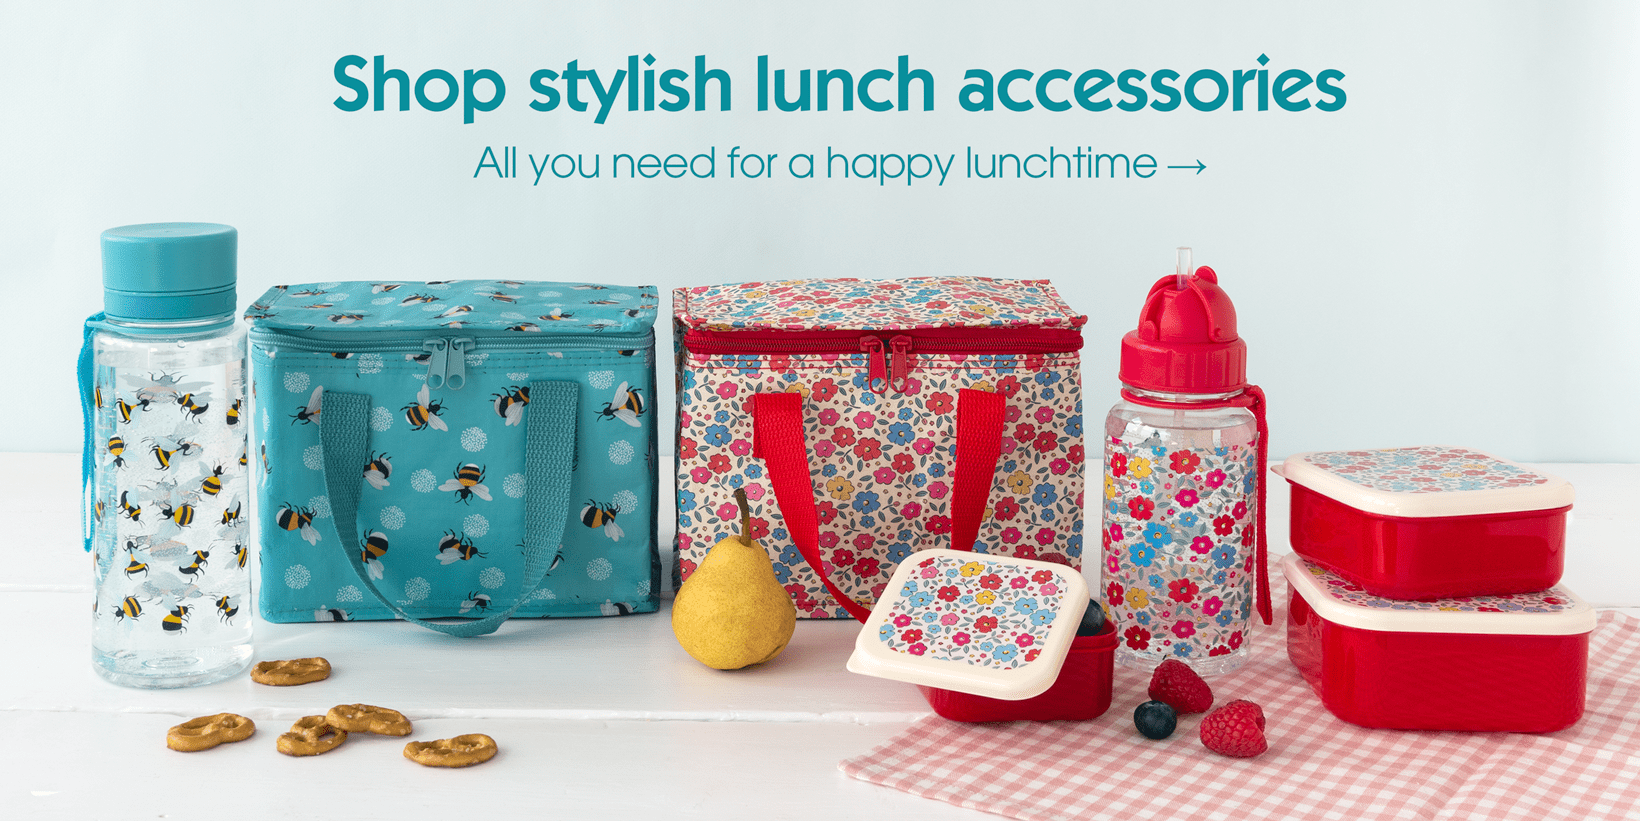 Lunch bags and water bottles in bee and floral designs